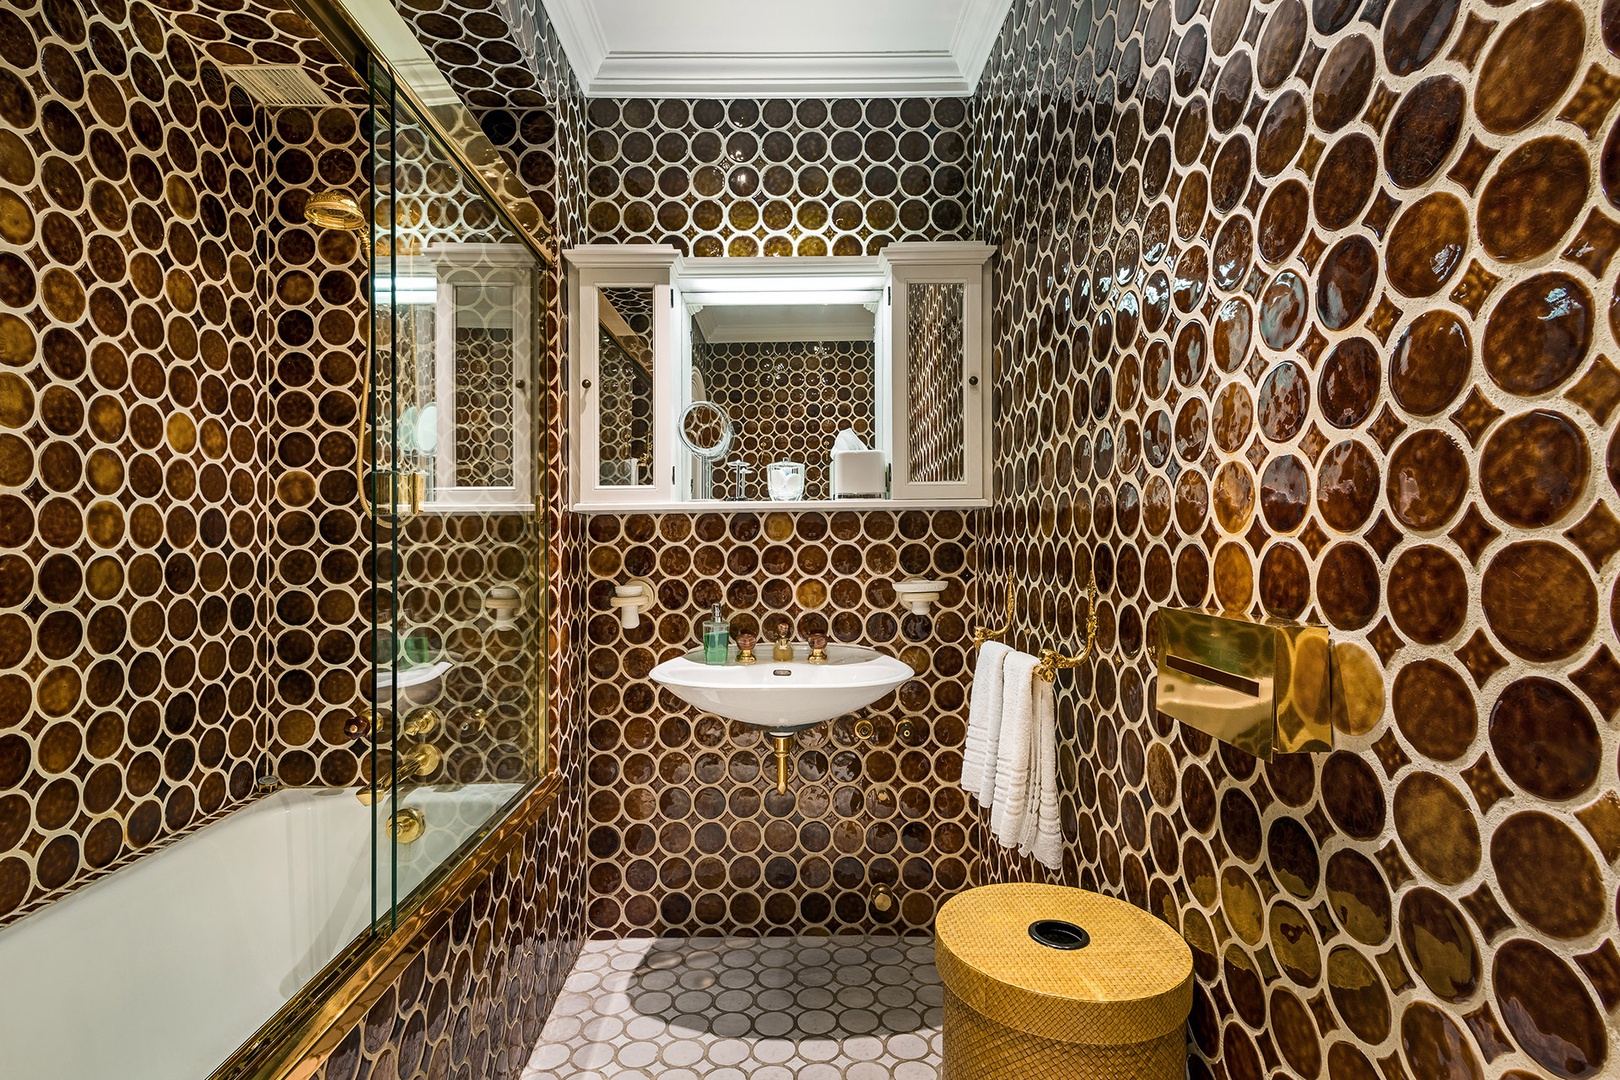 The designer bathroom 2 features one-of-a-kind tiling.